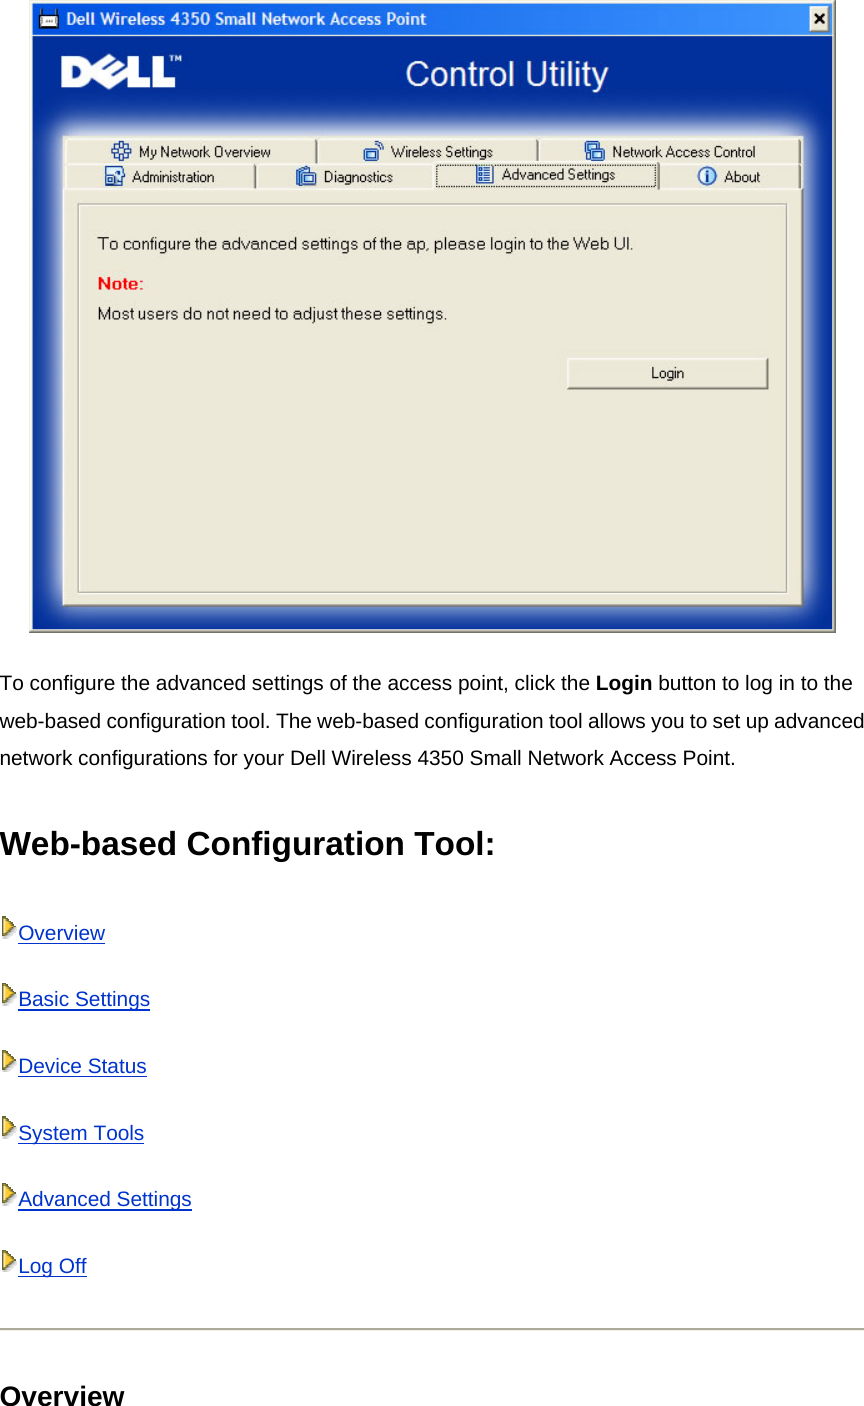  To configure the advanced settings of the access point, click the Login button to log in to the web-based configuration tool. The web-based configuration tool allows you to set up advanced network configurations for your Dell Wireless 4350 Small Network Access Point.  Web-based Configuration Tool: OverviewBasic SettingsDevice StatusSystem ToolsAdvanced SettingsLog Off Overview 